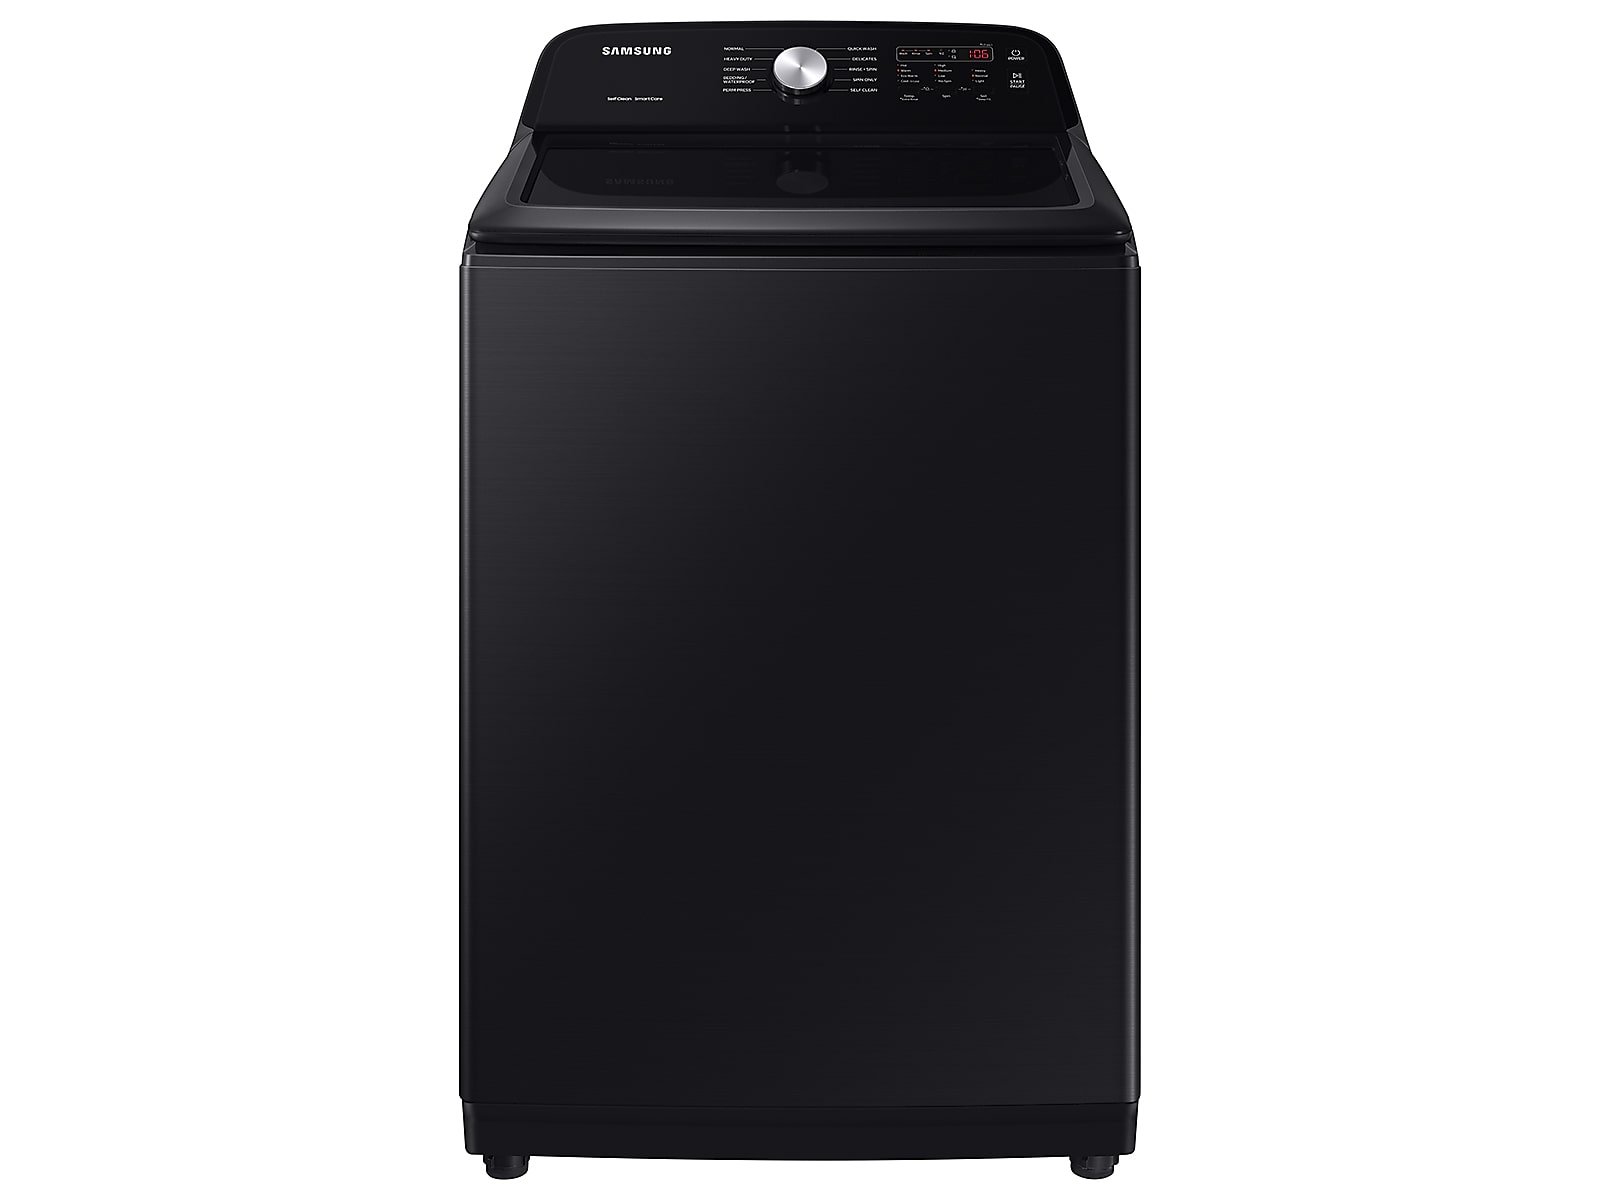 Samsung 5.0 cu. ft. Large Capacity Top Load Washer with Deep Fill and EZ Access Tub in Brushed Black (WA50B5100AV/US) photo